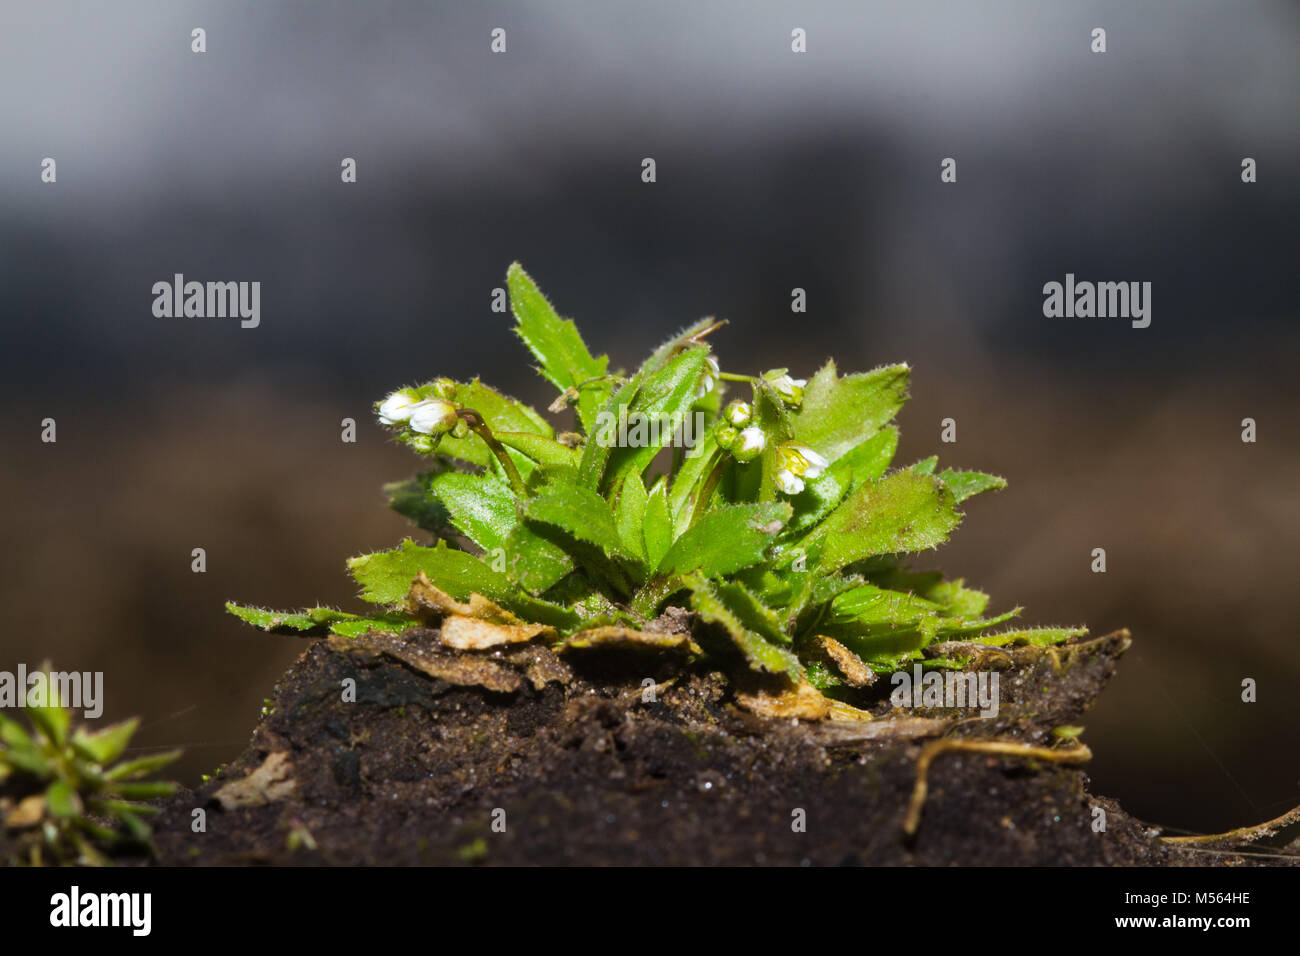 Spring draba, also known as Shadflower or Nailwort, growing on a clod of soil in the last days of winter Stock Photo